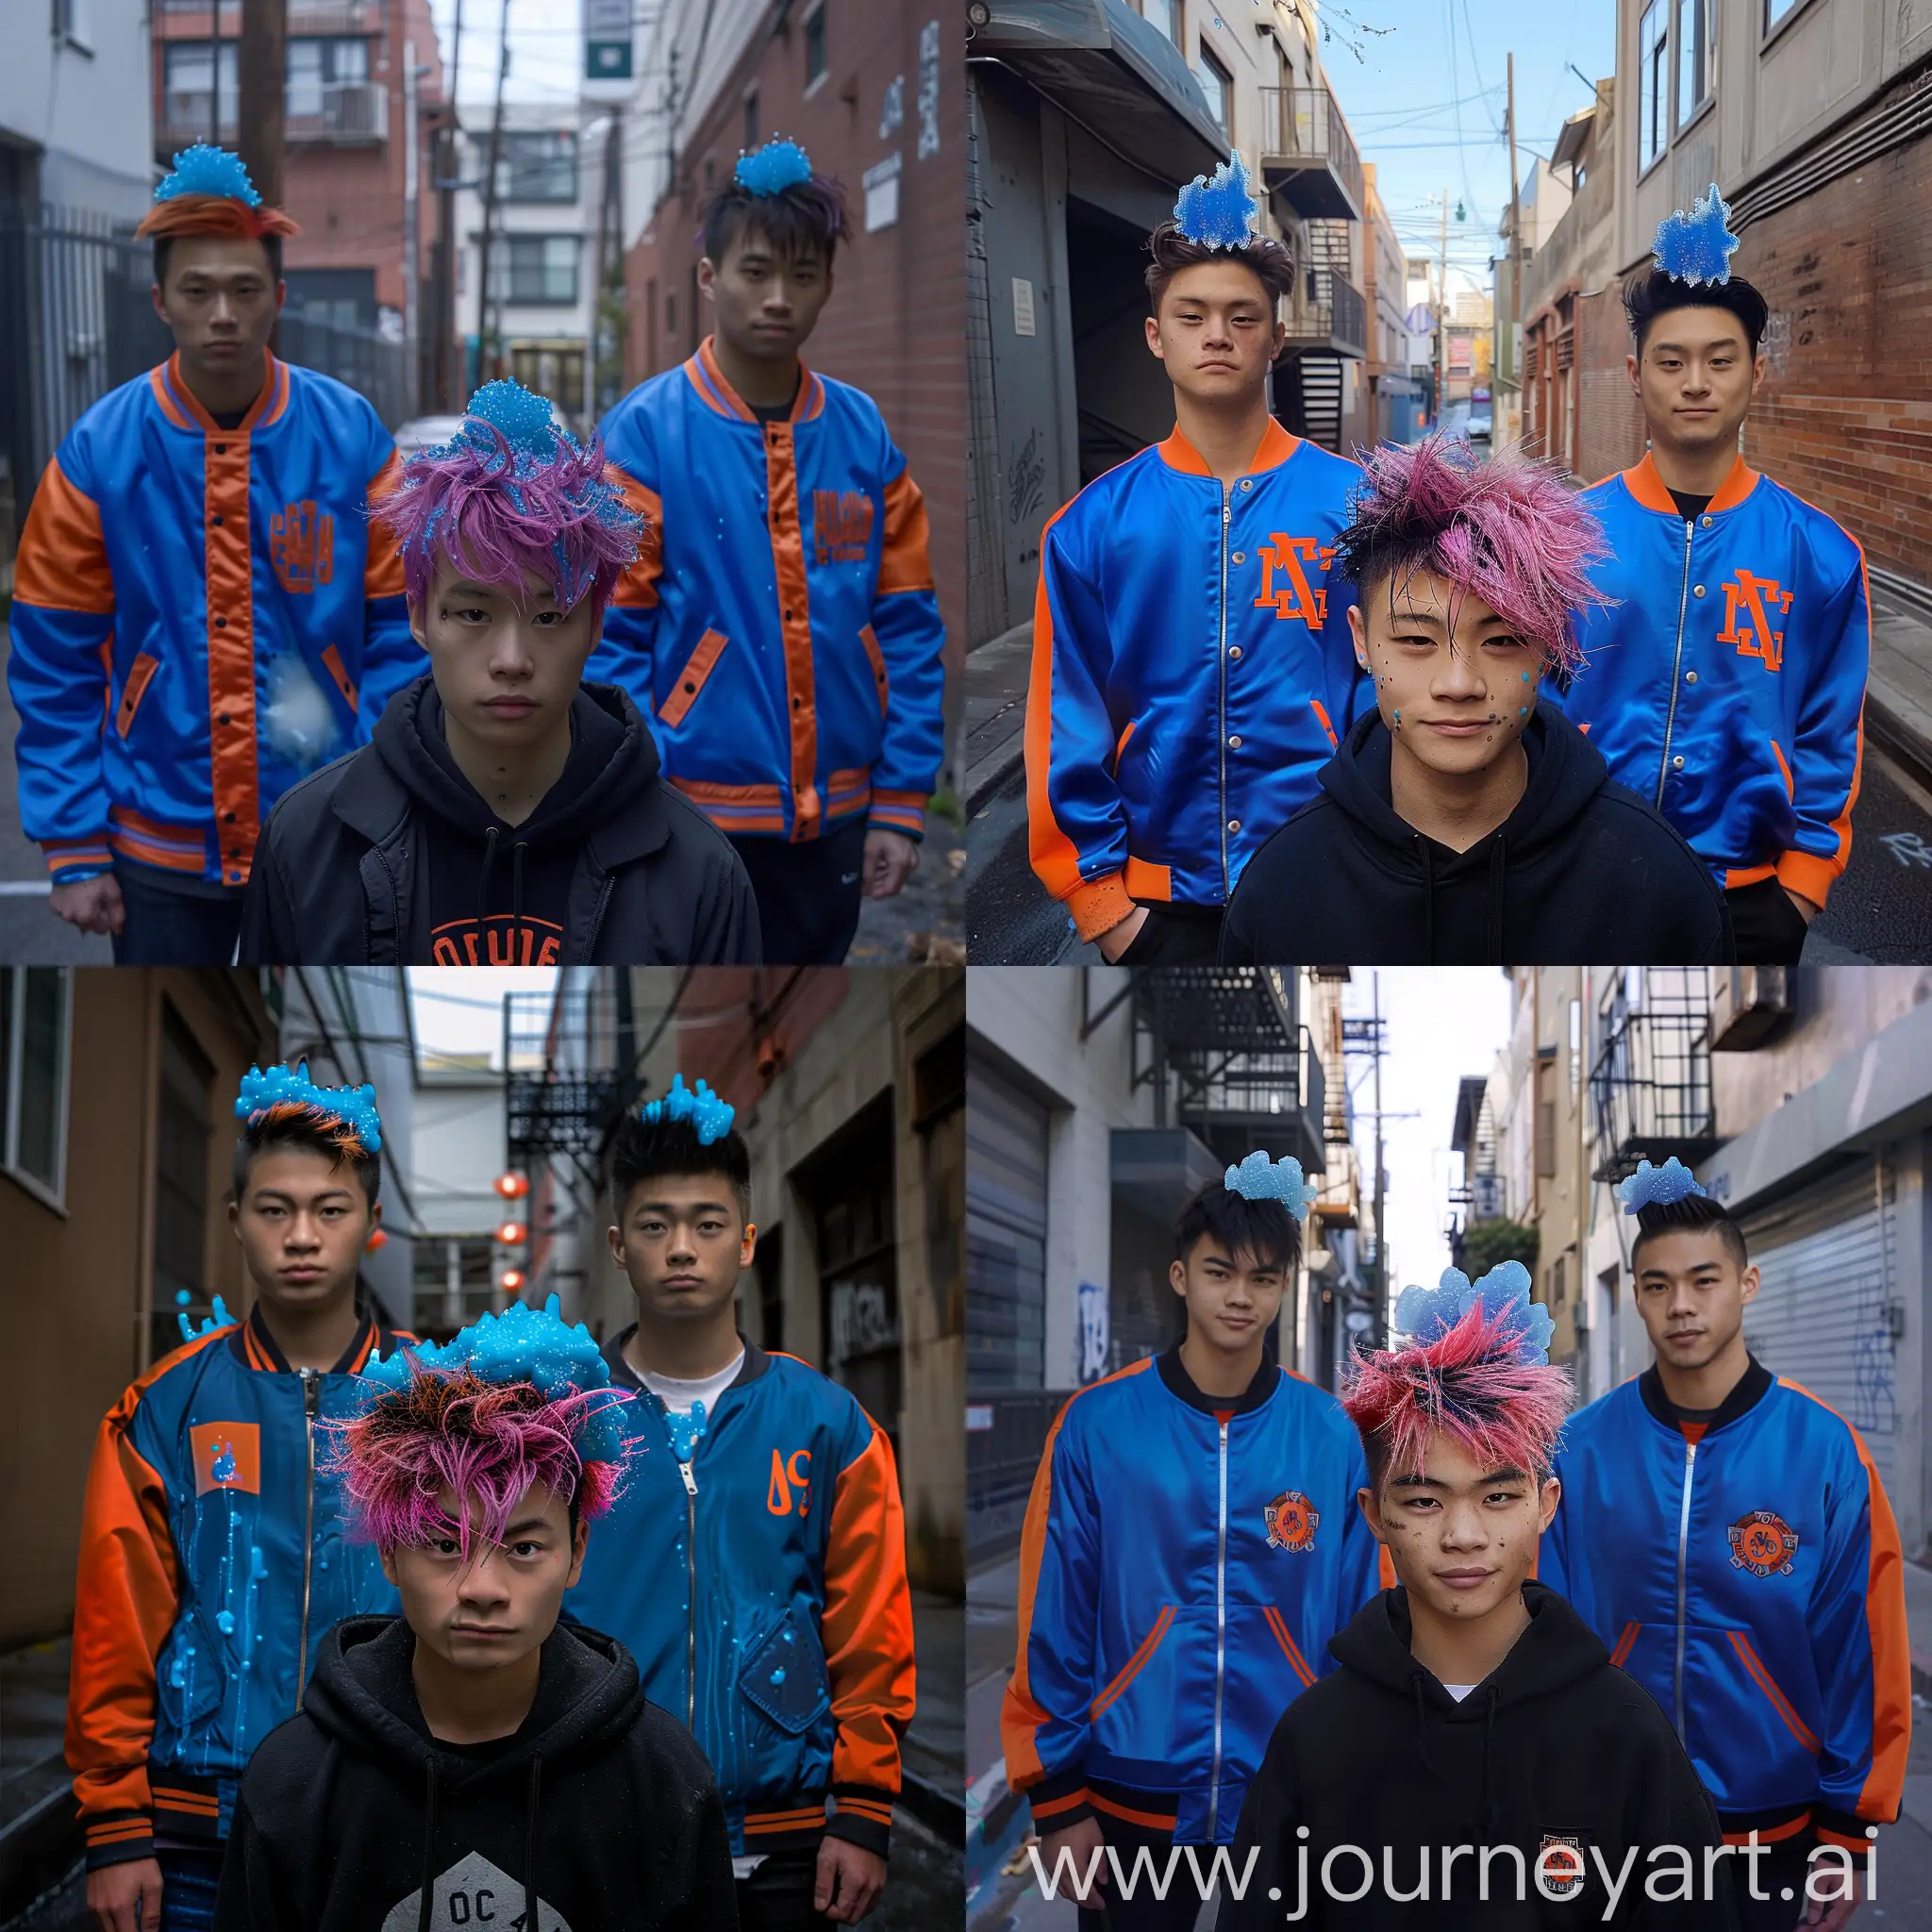 In front a short gothic young scrawny asian boy with messy pink dyed hair wearing a black hoddie, at an alley, with two handsome tall fit asian jocks wearing blue Letterman jackets with orange sleeves and with small tiny blue transparent gelatinous slime on top of jocks heads, two fit good looking jocks, alley background